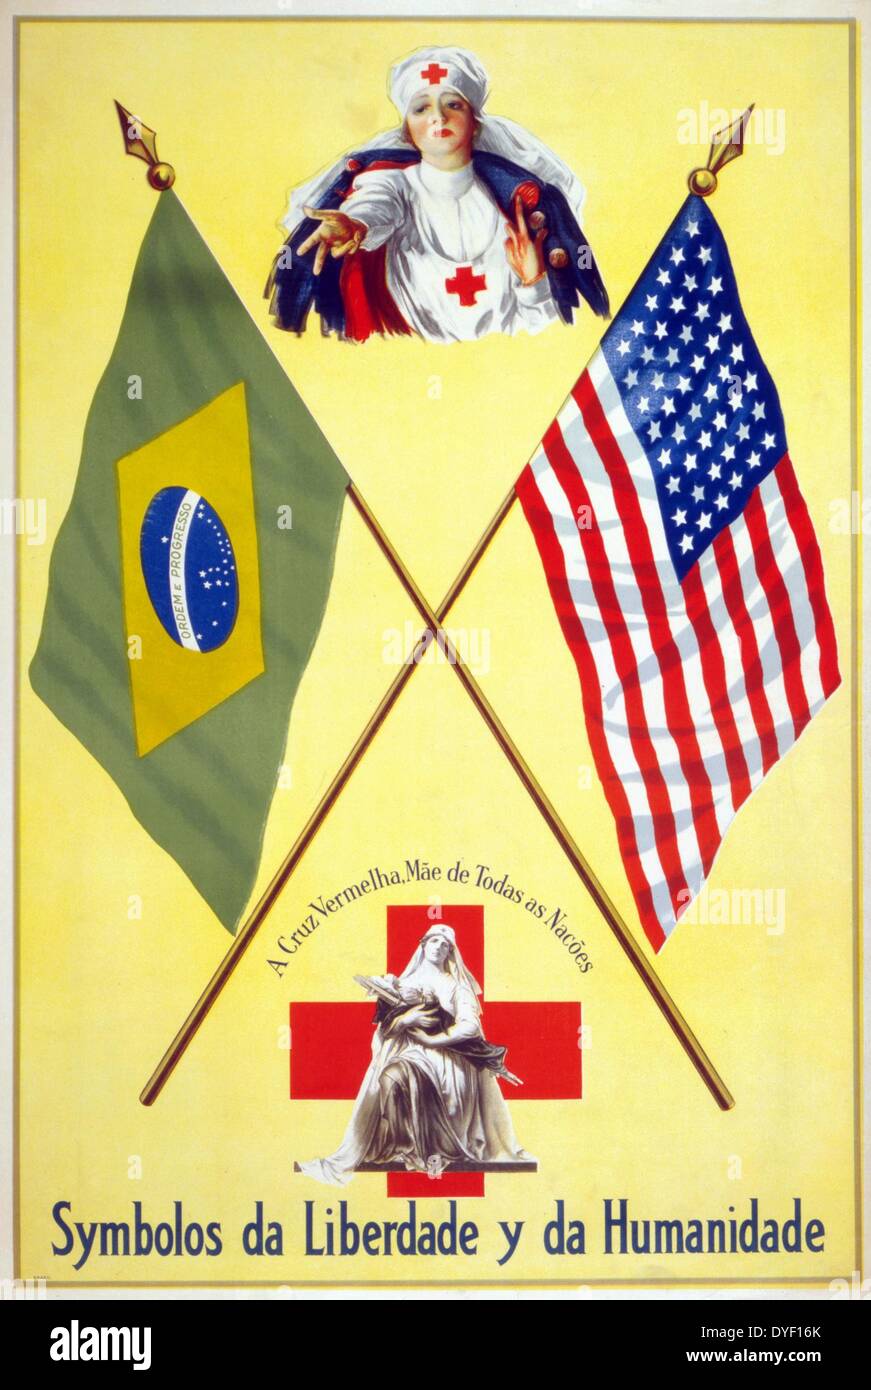 Symbols da liberdade y da humanidade A Crux Vermelha, Mãe de todas as nacões. Published: [between 1914 and 1918]. Poster showing two Red Cross nurses, one, a Madonna figure, cradling in her arms a wounded soldier(?) on a litter, between the flags of Brazil and the United States. Stock Photo